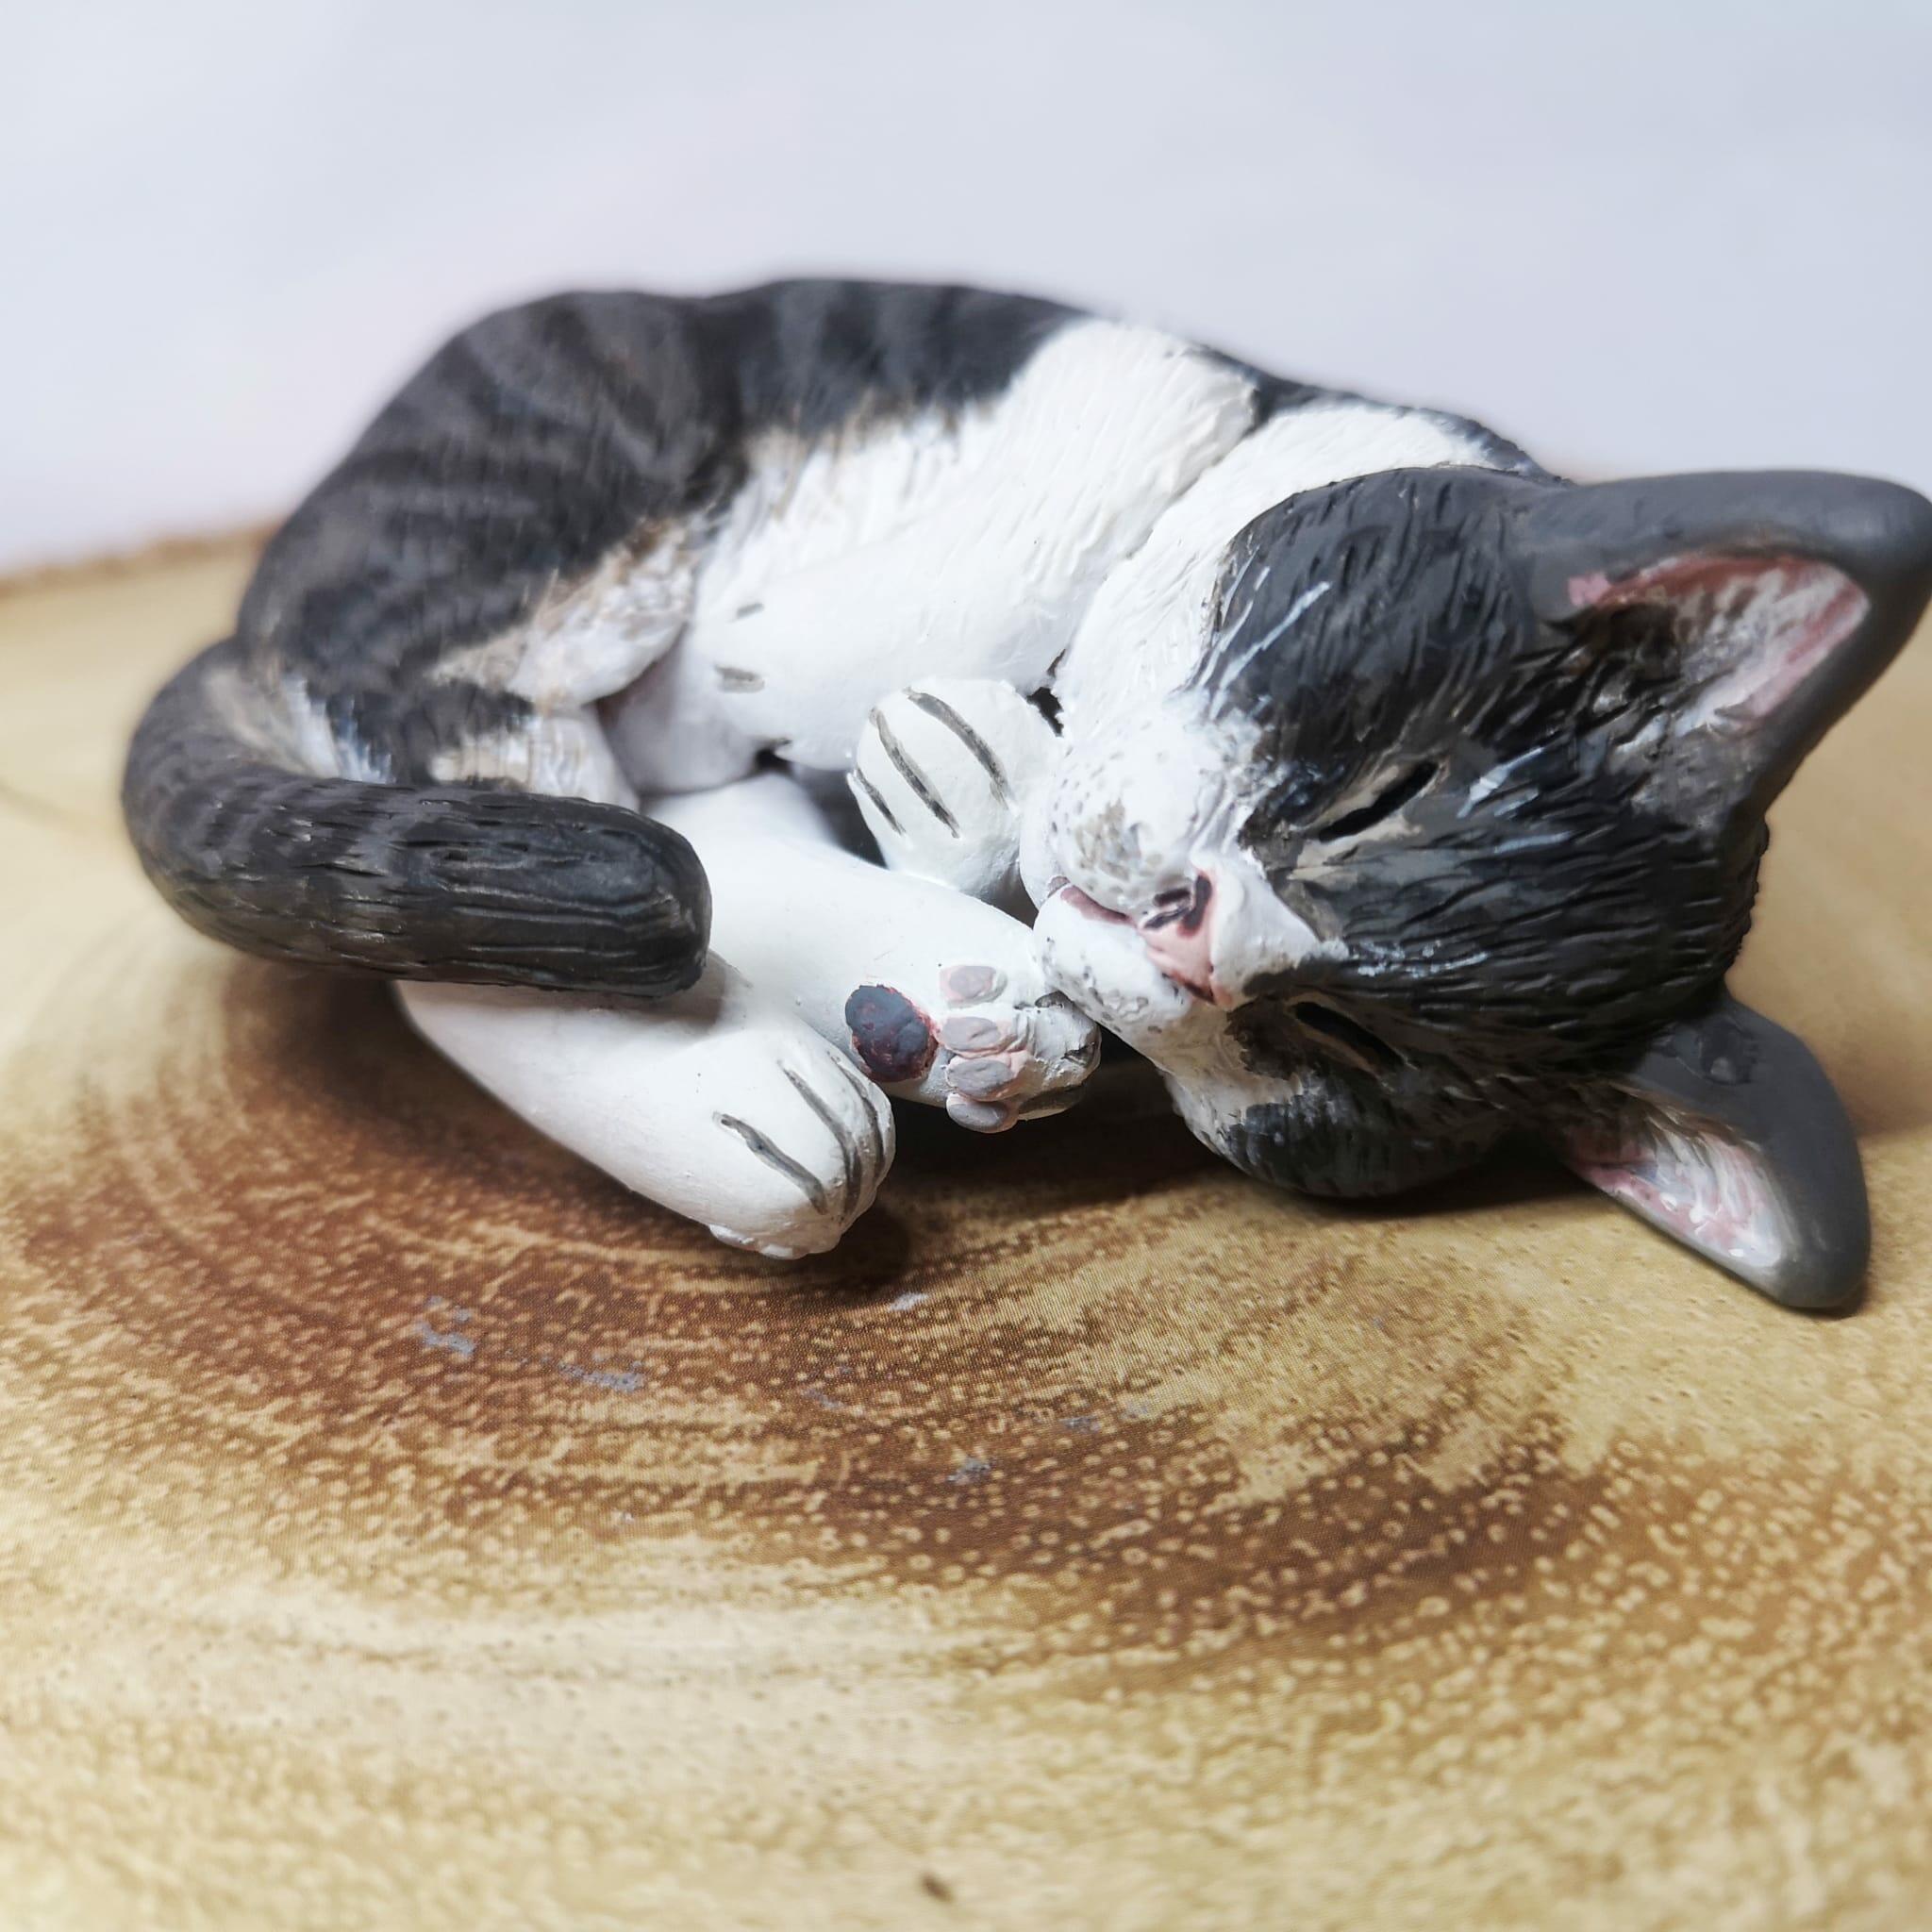 Handmade and handpainted clay model of a sleeping cat, showcasing a lifelike and serene representation of your feline friend, crafted with care and personalized to capture their unique personality